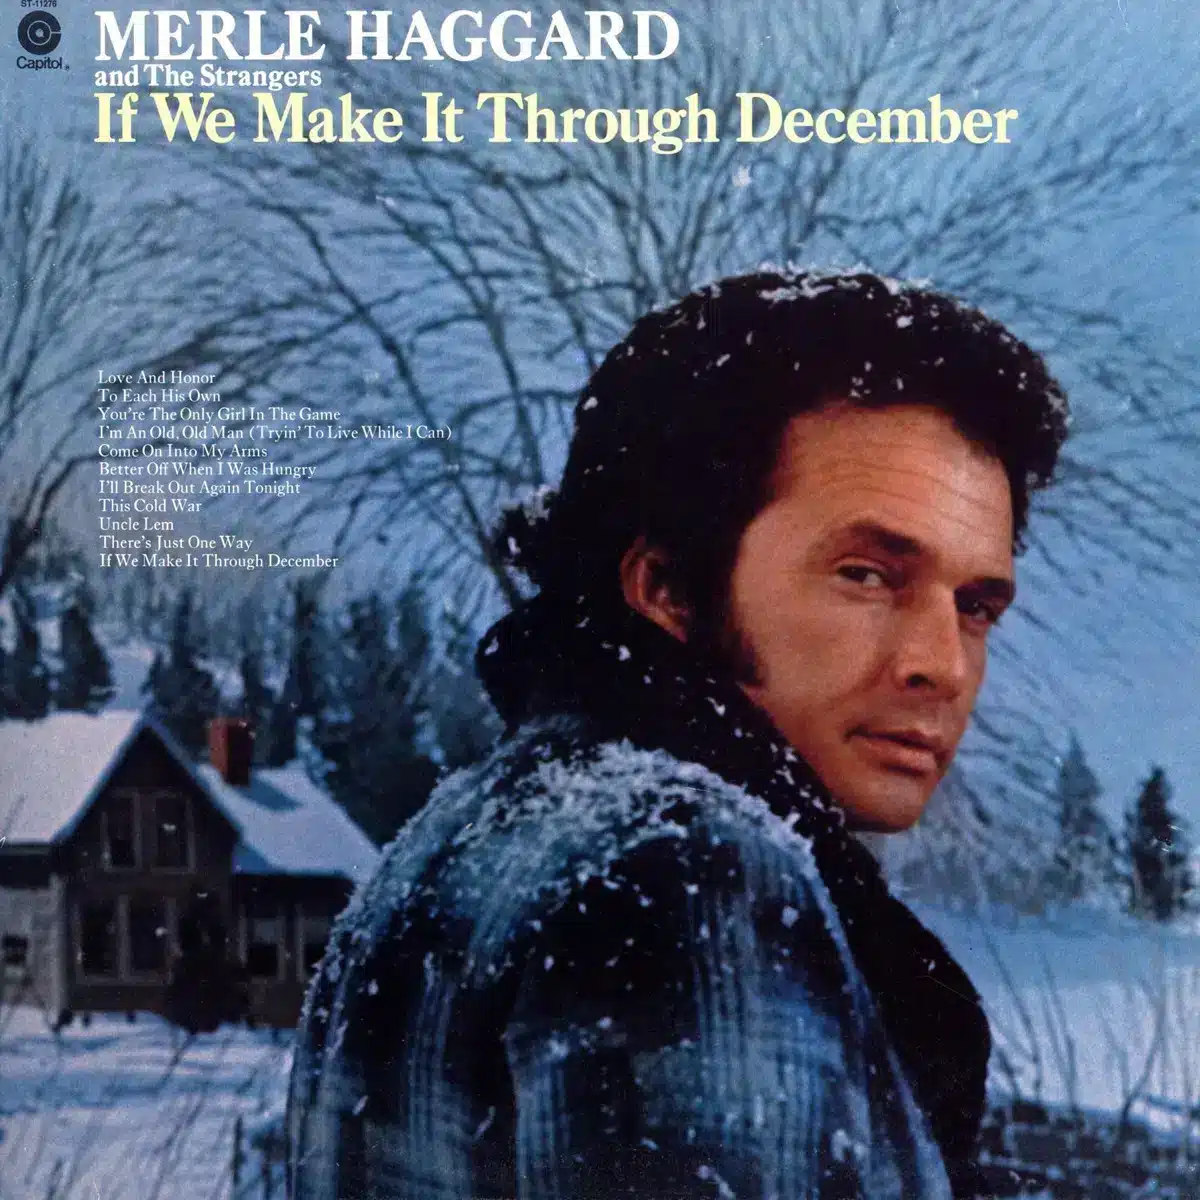 Cover art for Merle Haggard's "If We Make It Through December"